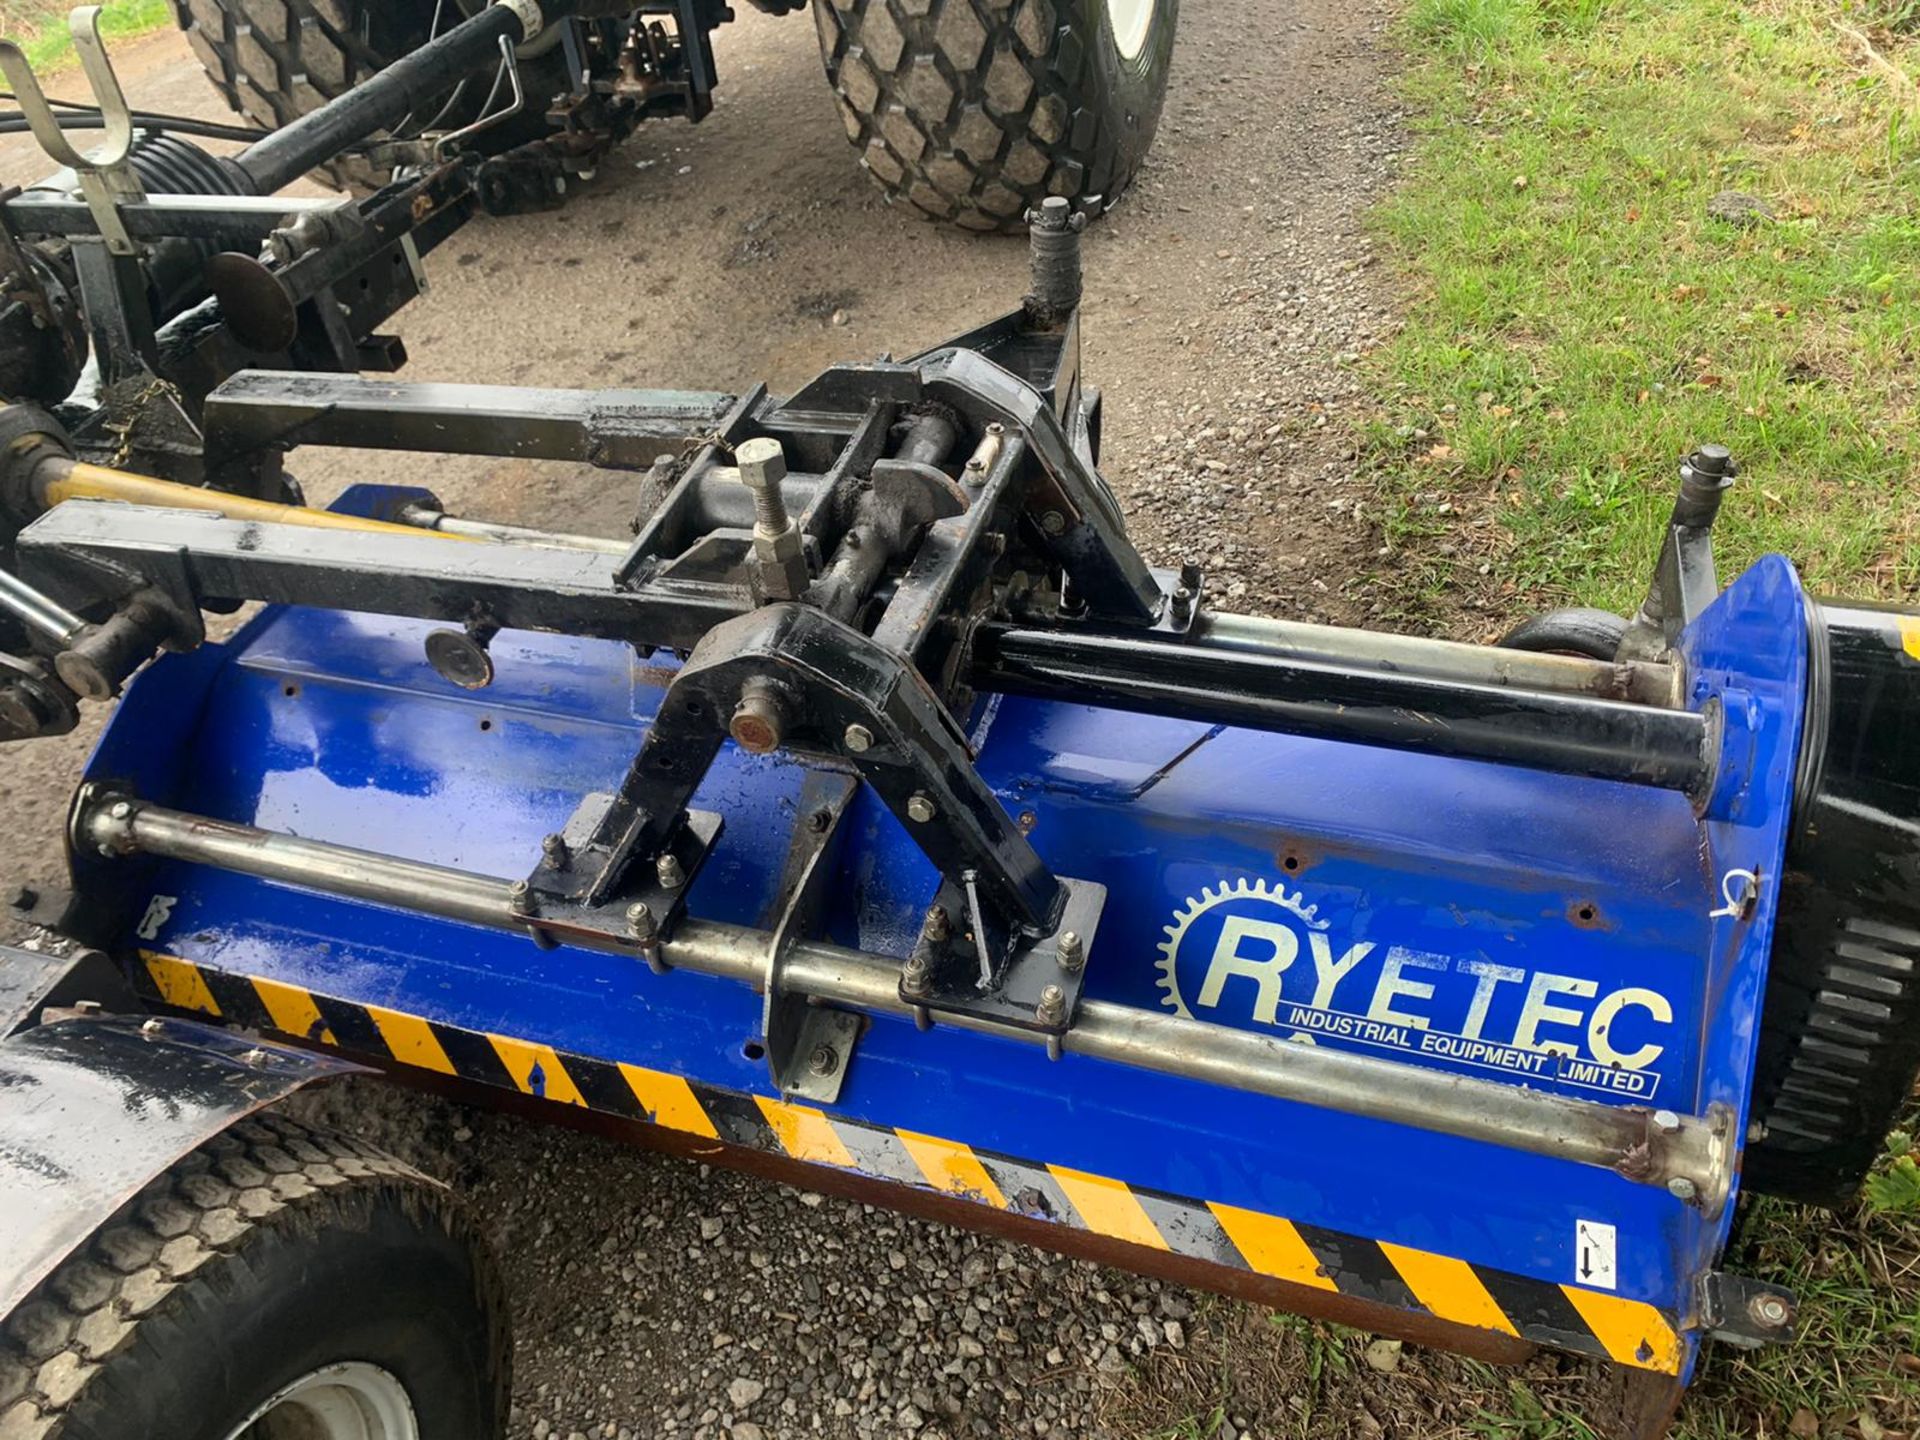 RYETEC TRIFLEX 4200 TOWBEHIND FLAIL 3 GANG MOWER, IN WORKING ORDER, PTO DRIVEN *PLUS VAT* - Image 10 of 15